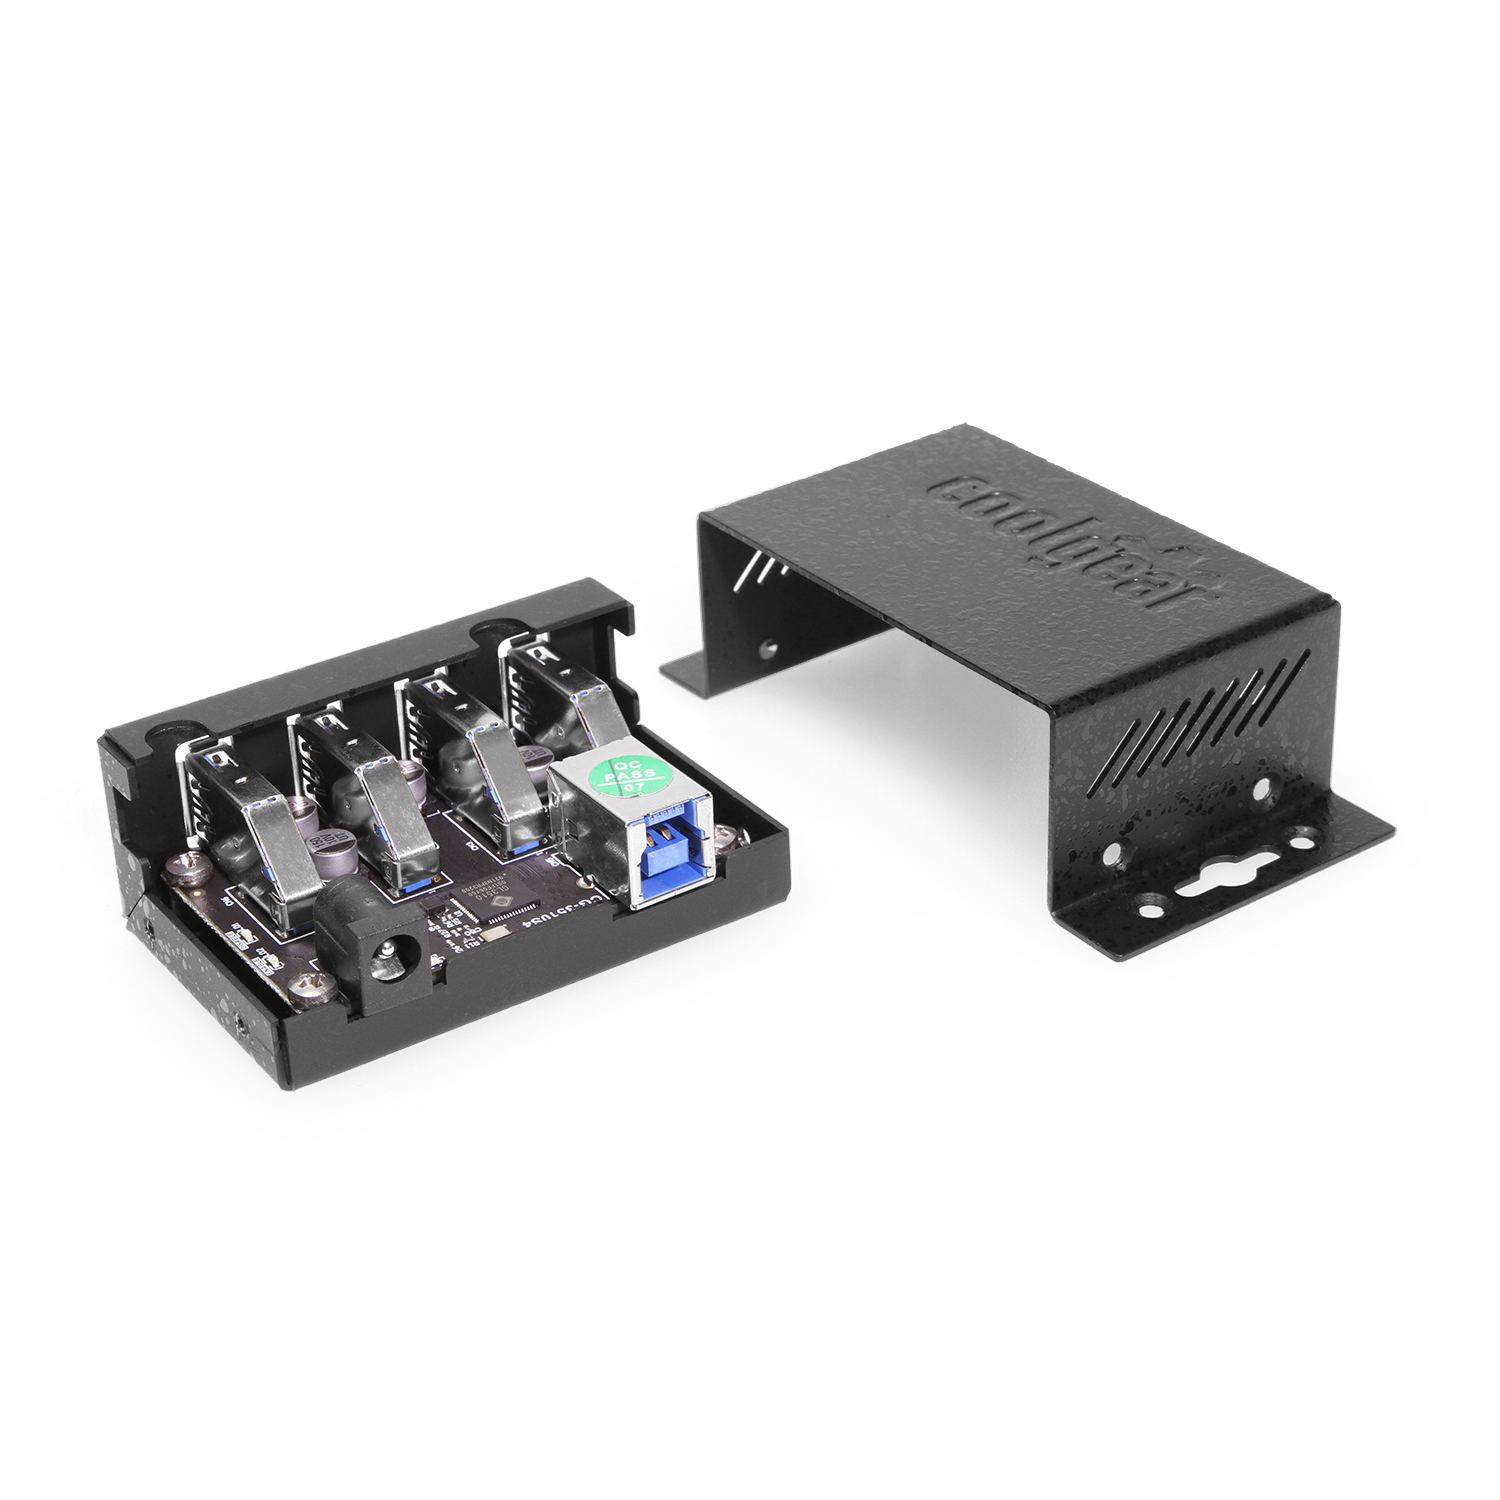 4 Port USB 3.2 Gen 1 Type-C Power Delivery Hub w/ ESD Surge Protection &  Screw Locking Ports - Coolgear